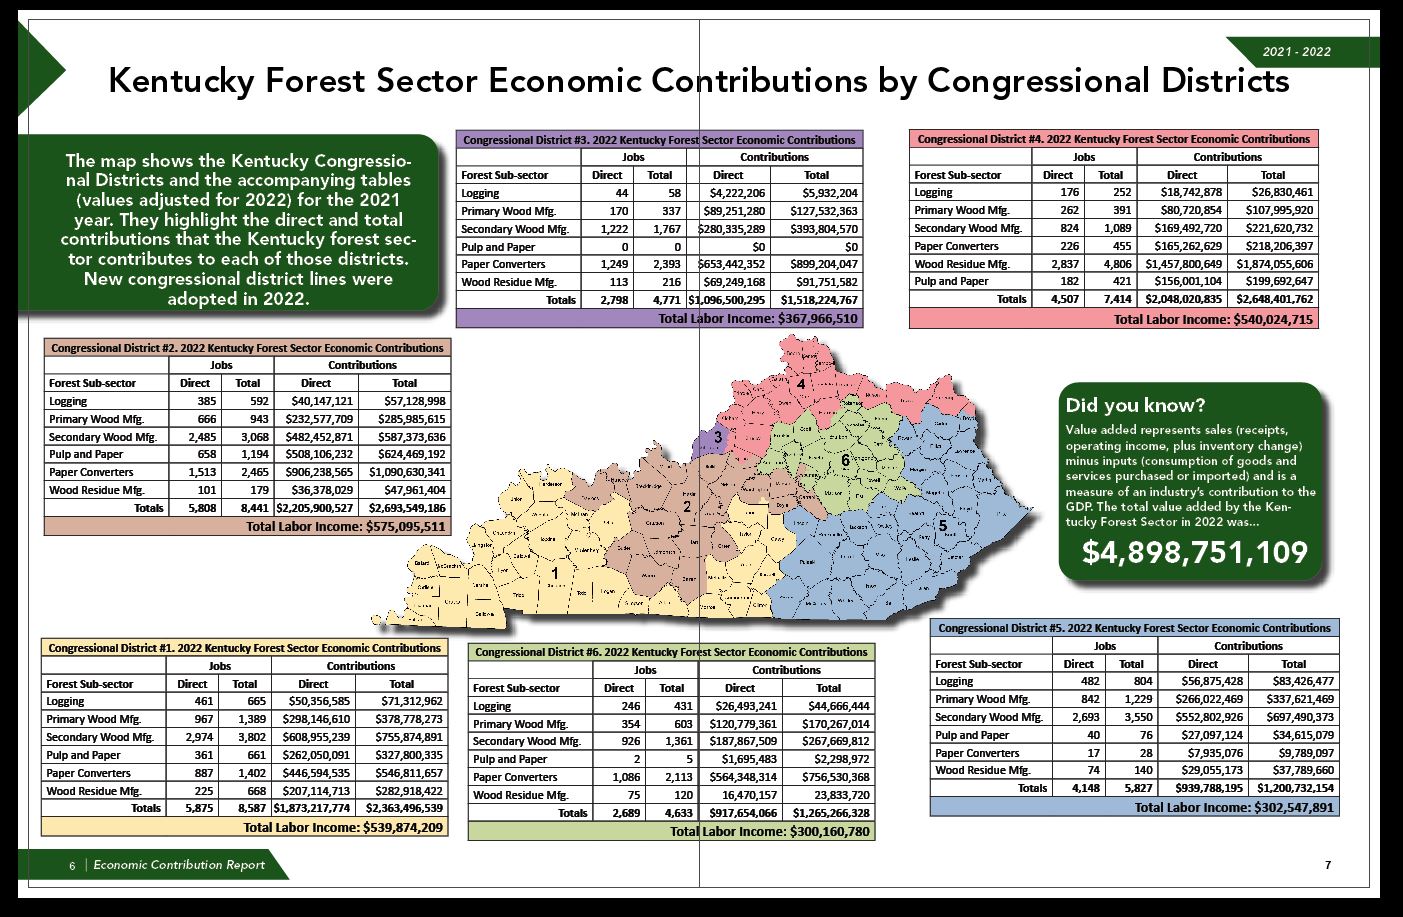 Kentucky Forest Sector Economic Contributions by Congressional Districts